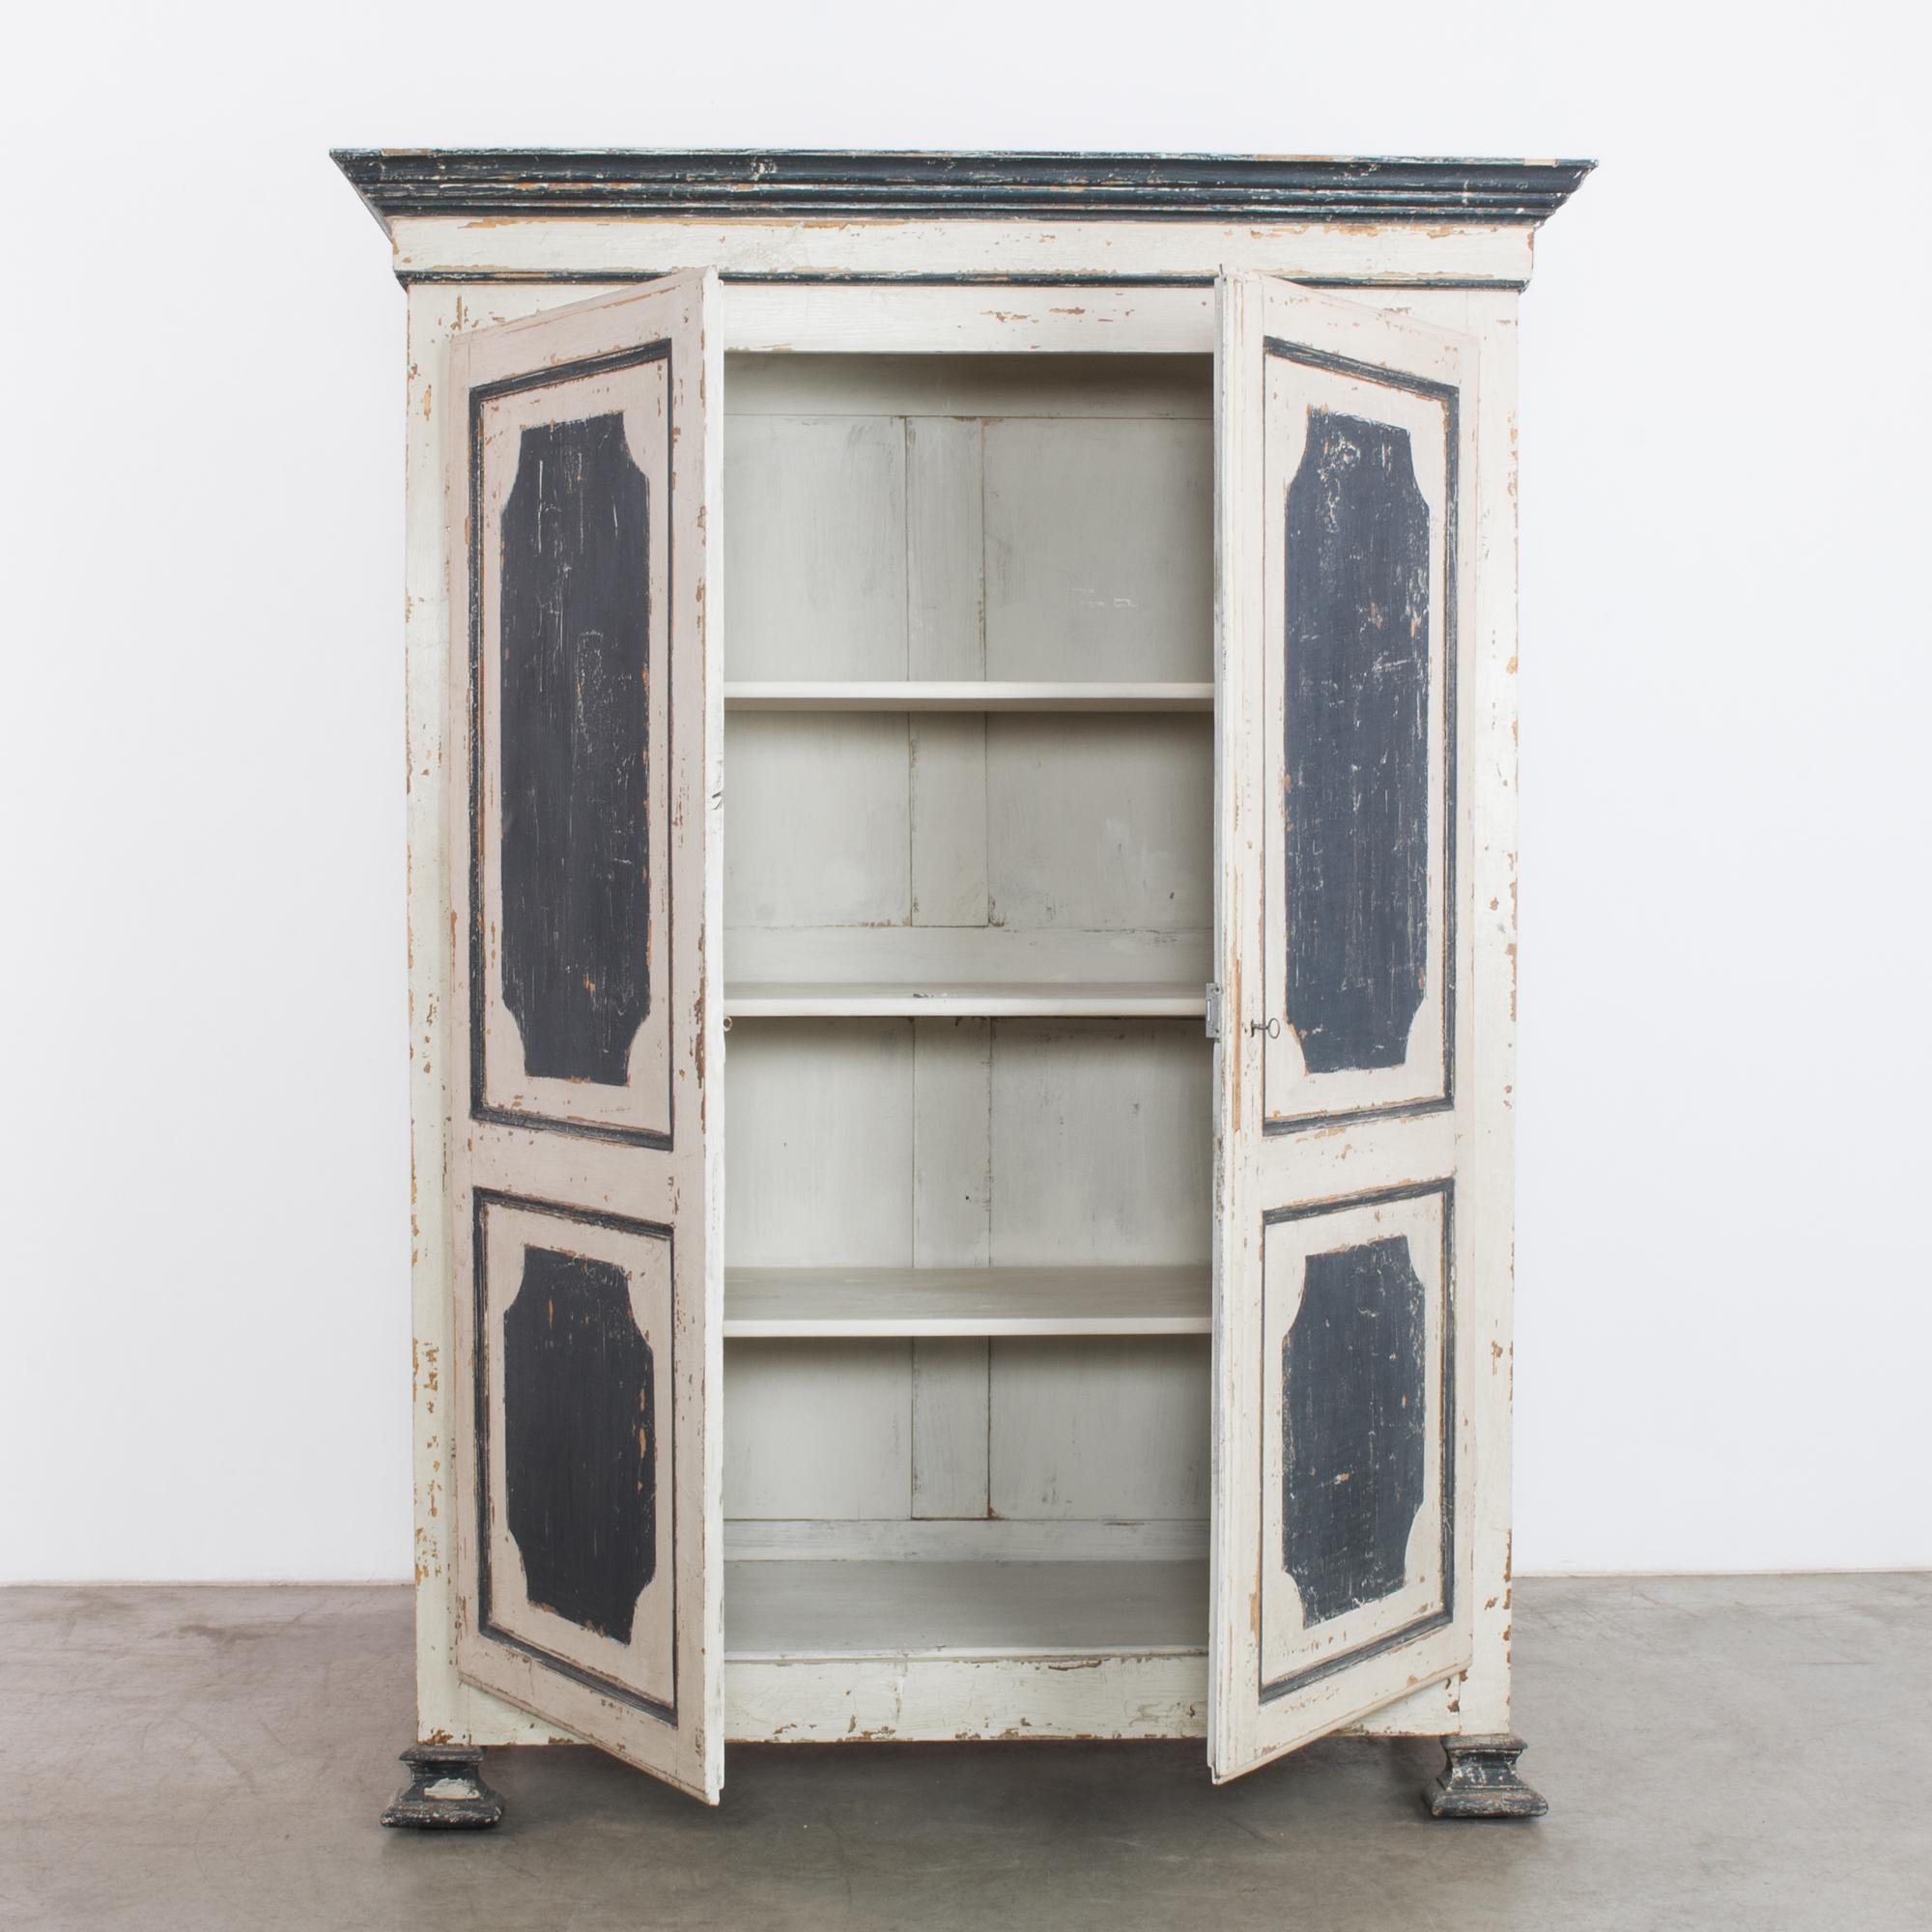 A wooden armoire from Belgium, circa 1880, painted bone white with coal black accents on the panels, top rail and feet. Tall doors open onto a shelved interior. The painted surface has weathered and chipped into a nostalgic patina, misting the